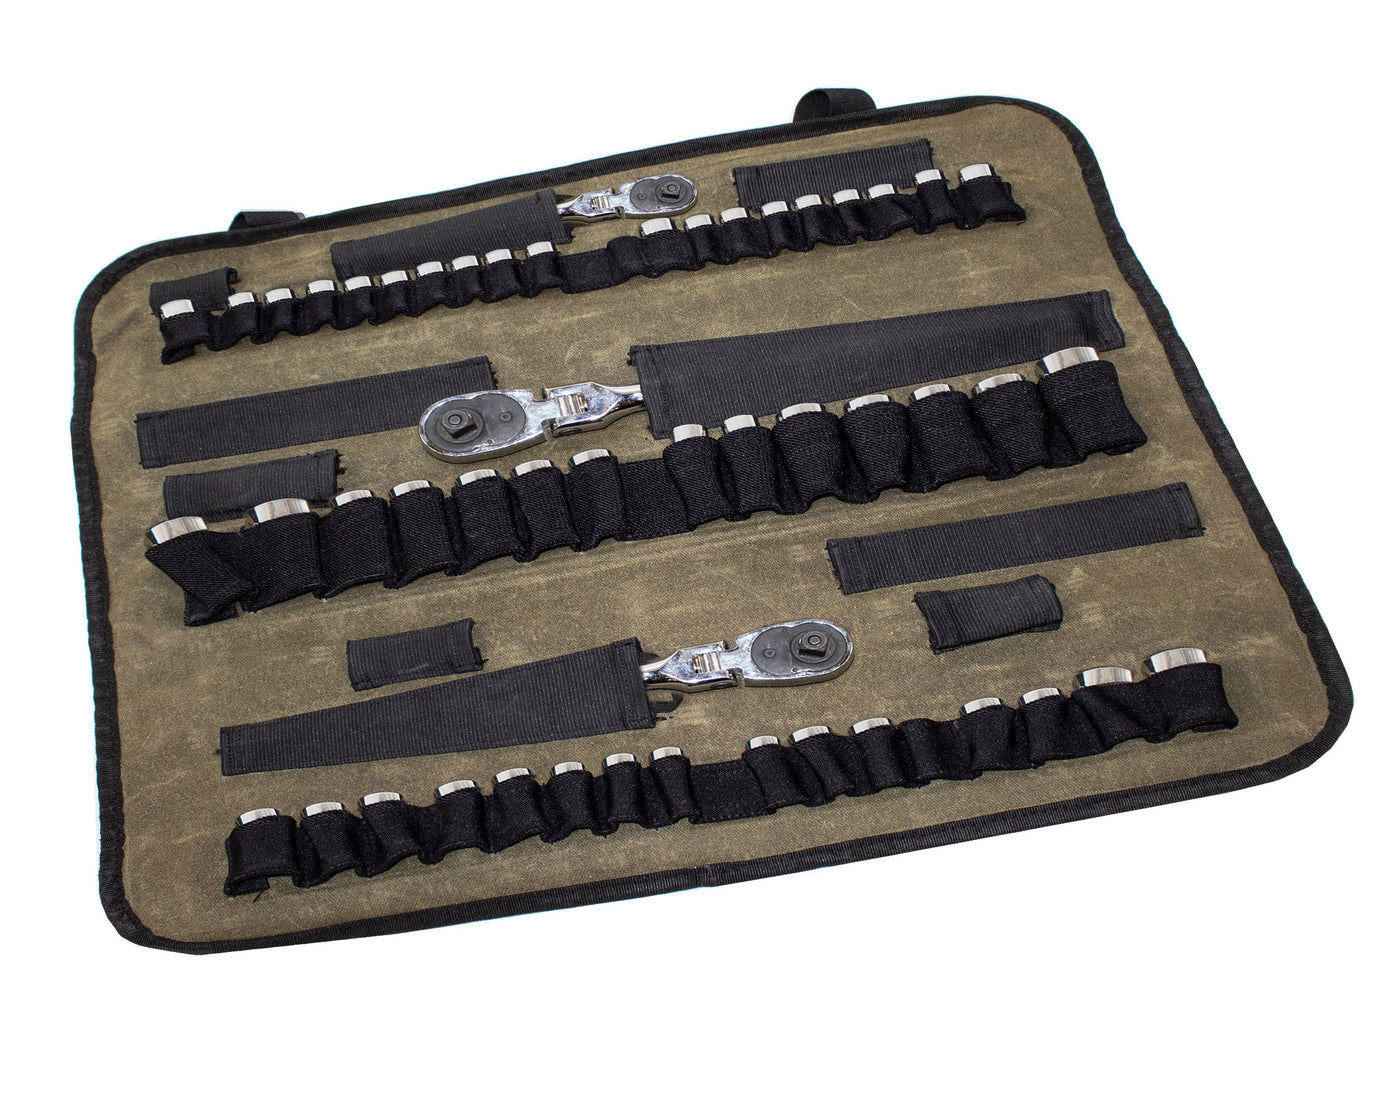 Overland Vehicle Systems Canyon Bag Rolled Socket Set Tote